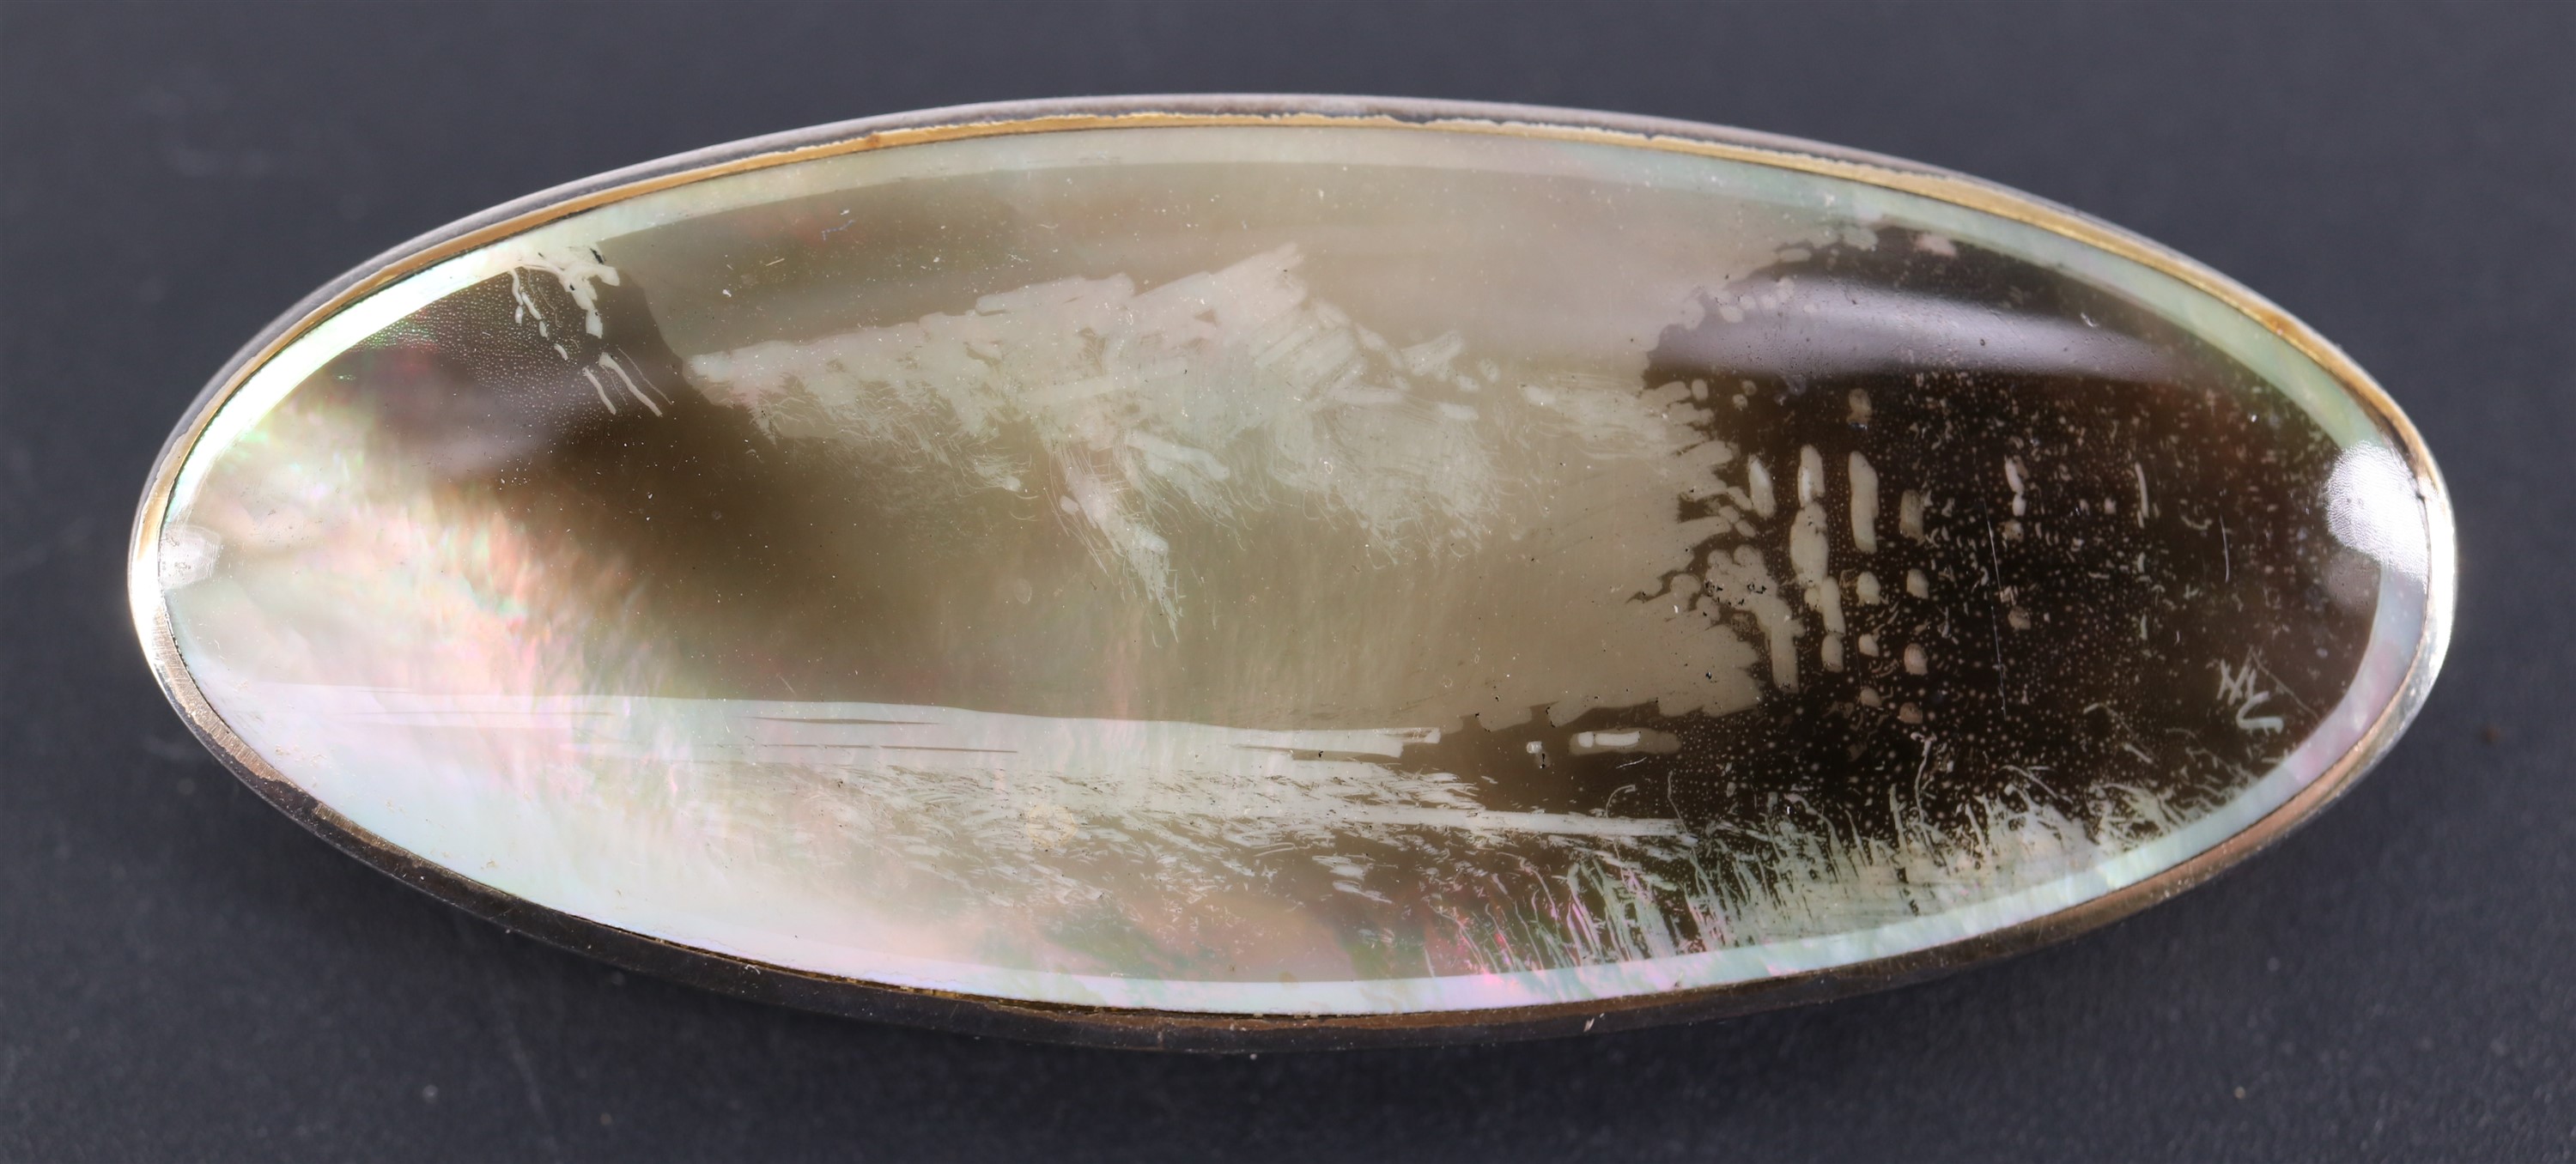 A silver-mounted candlesmoke lakeview on mother-of-pearl brooch by Maurice William Crawshaw, with